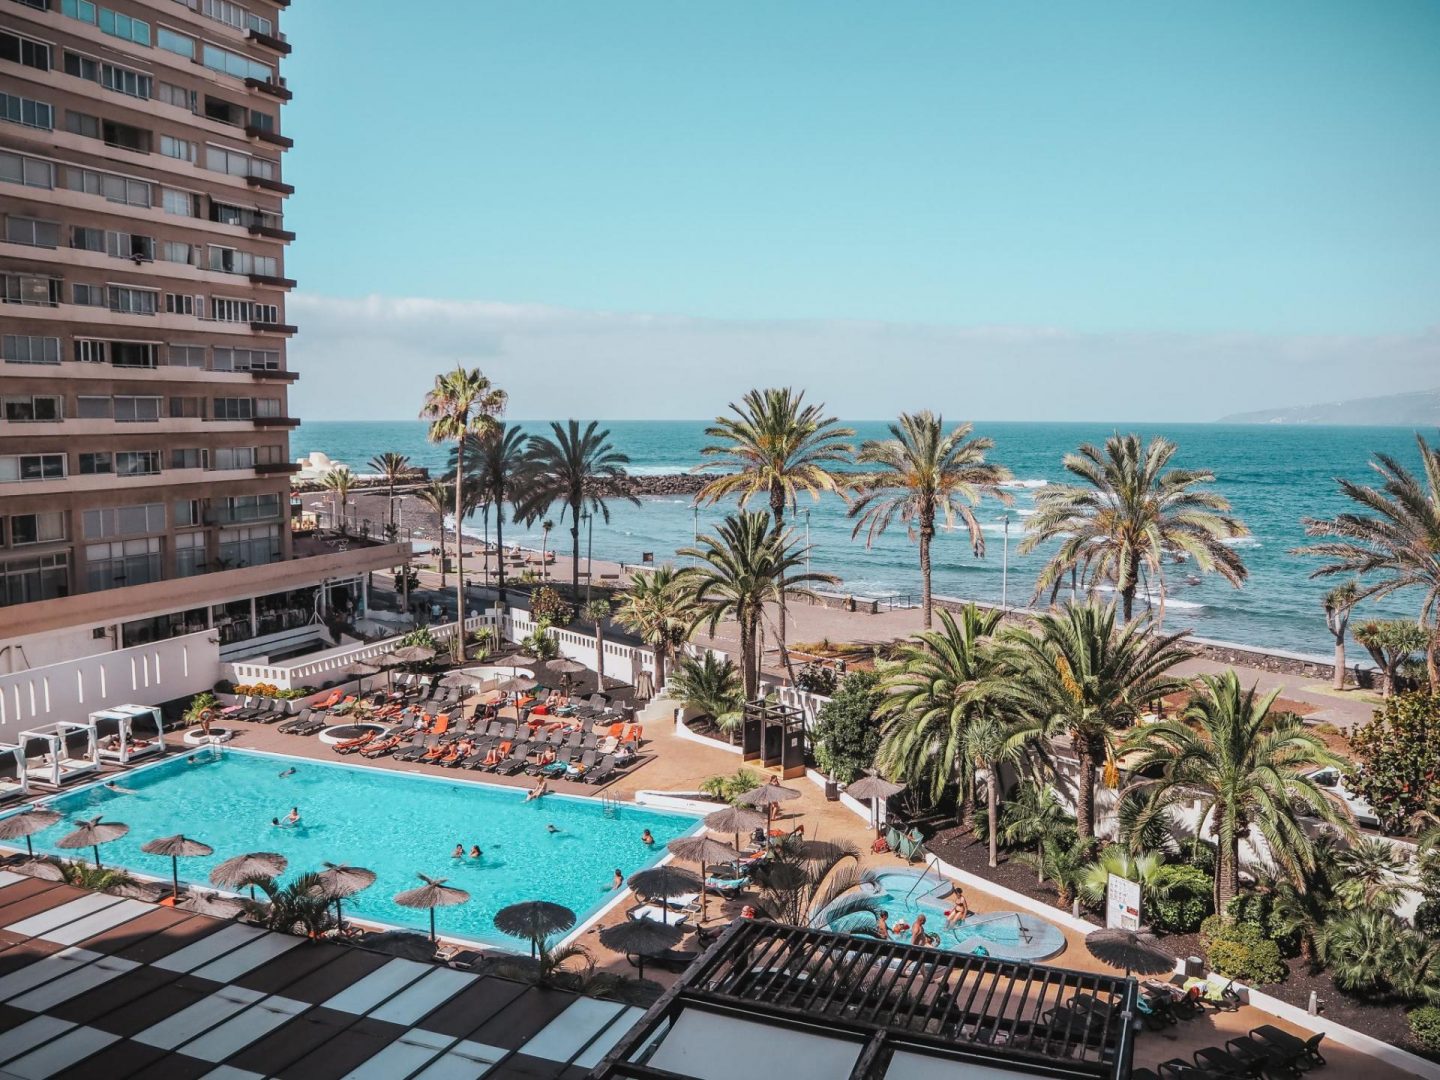 A trip to Tenerife with Jet 2